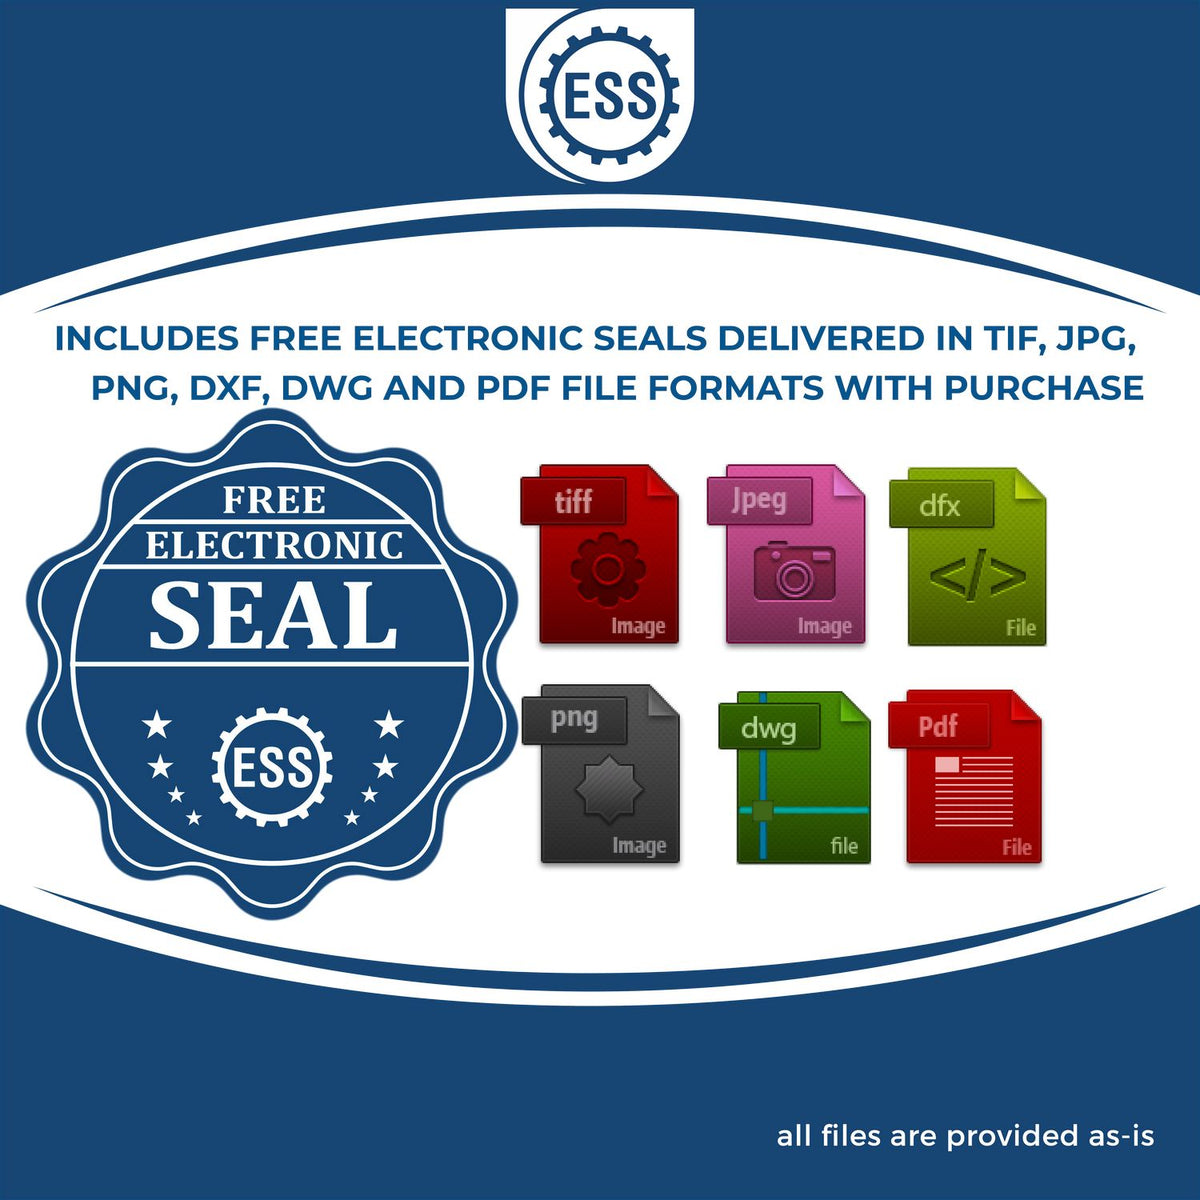 An infographic for the free electronic seal for the Heavy Duty Cast Iron Kentucky Architect Embosser illustrating the different file type icons such as DXF, DWG, TIF, JPG and PNG.